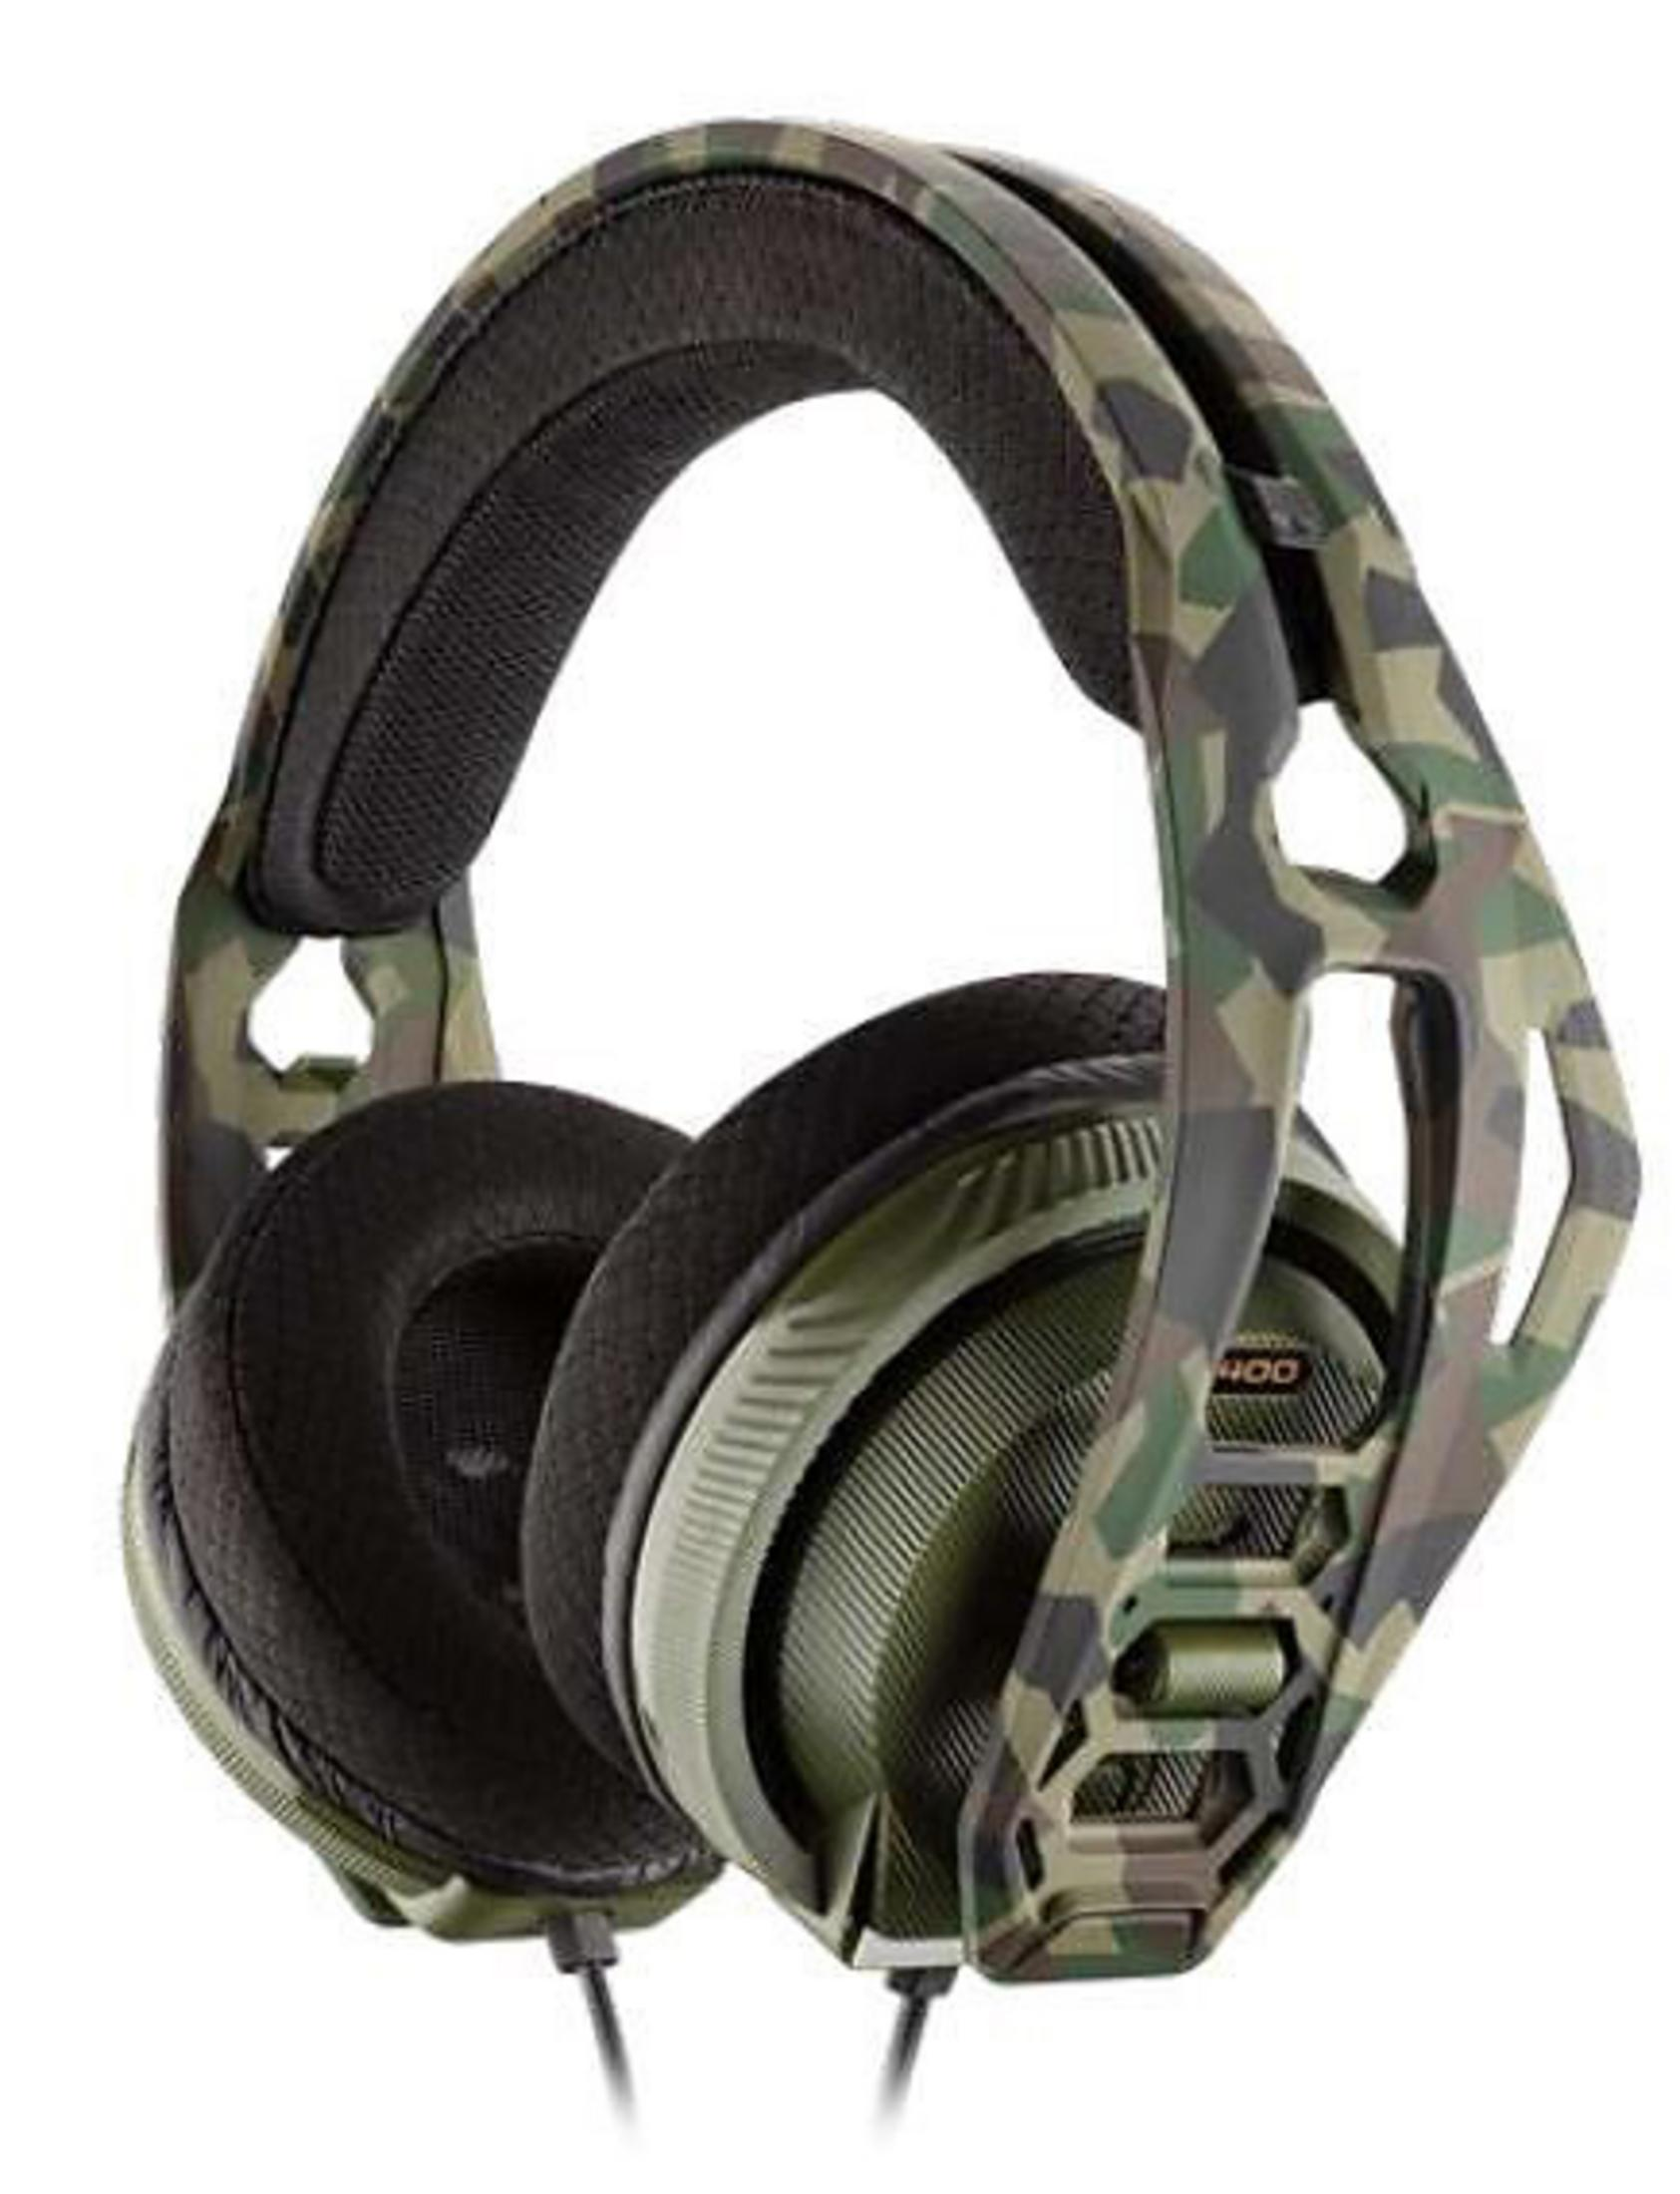 NACON PL053897 RIG 400 HX Camogrün Over-ear Gaming Headset FOREST, CAMO